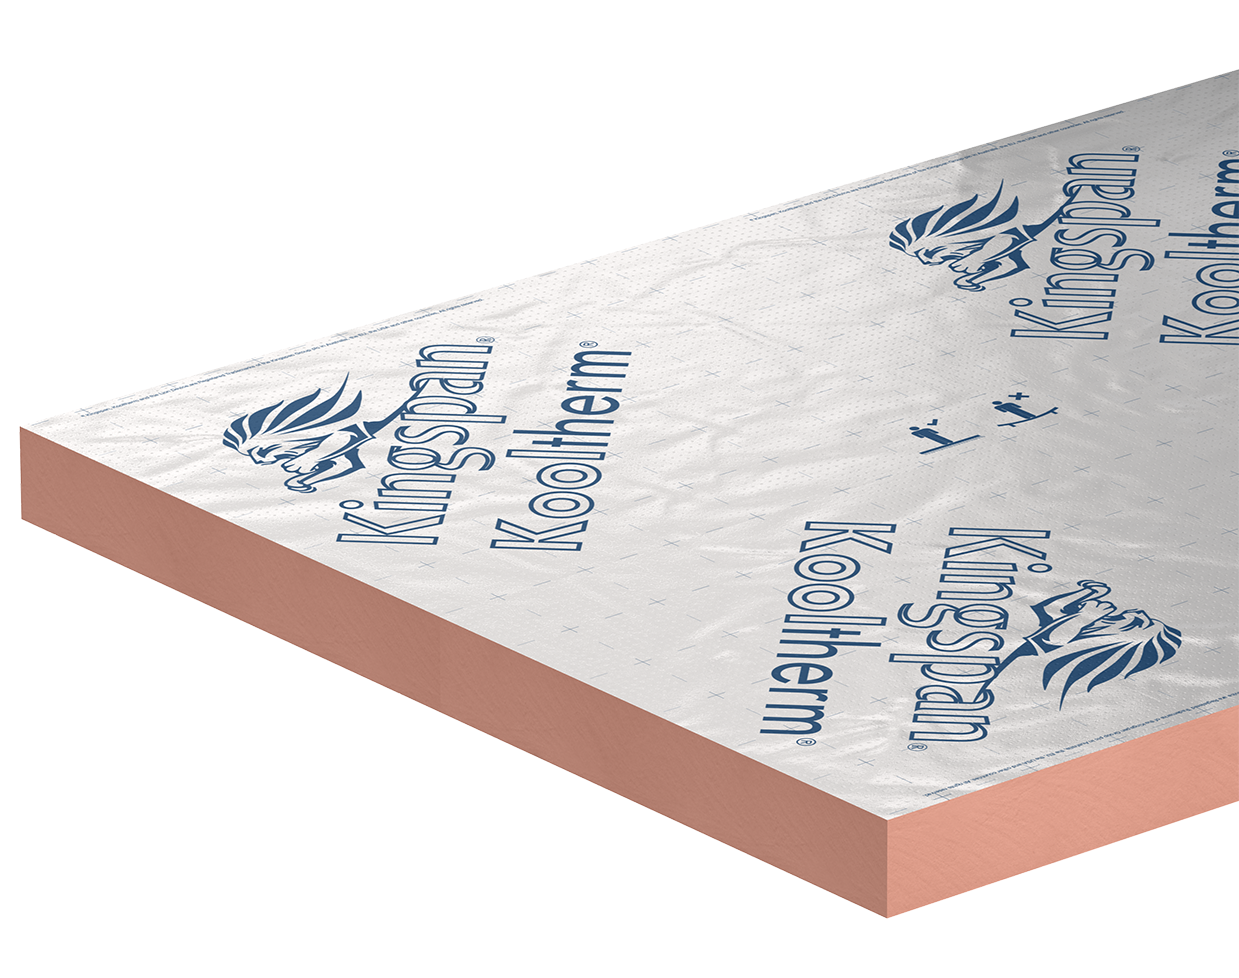 Kingspan Kooltherm K107 Pitched Roof Insulation - 2400mm x 1200mm x 75mm (pack of 4 sheets 11.52m2)